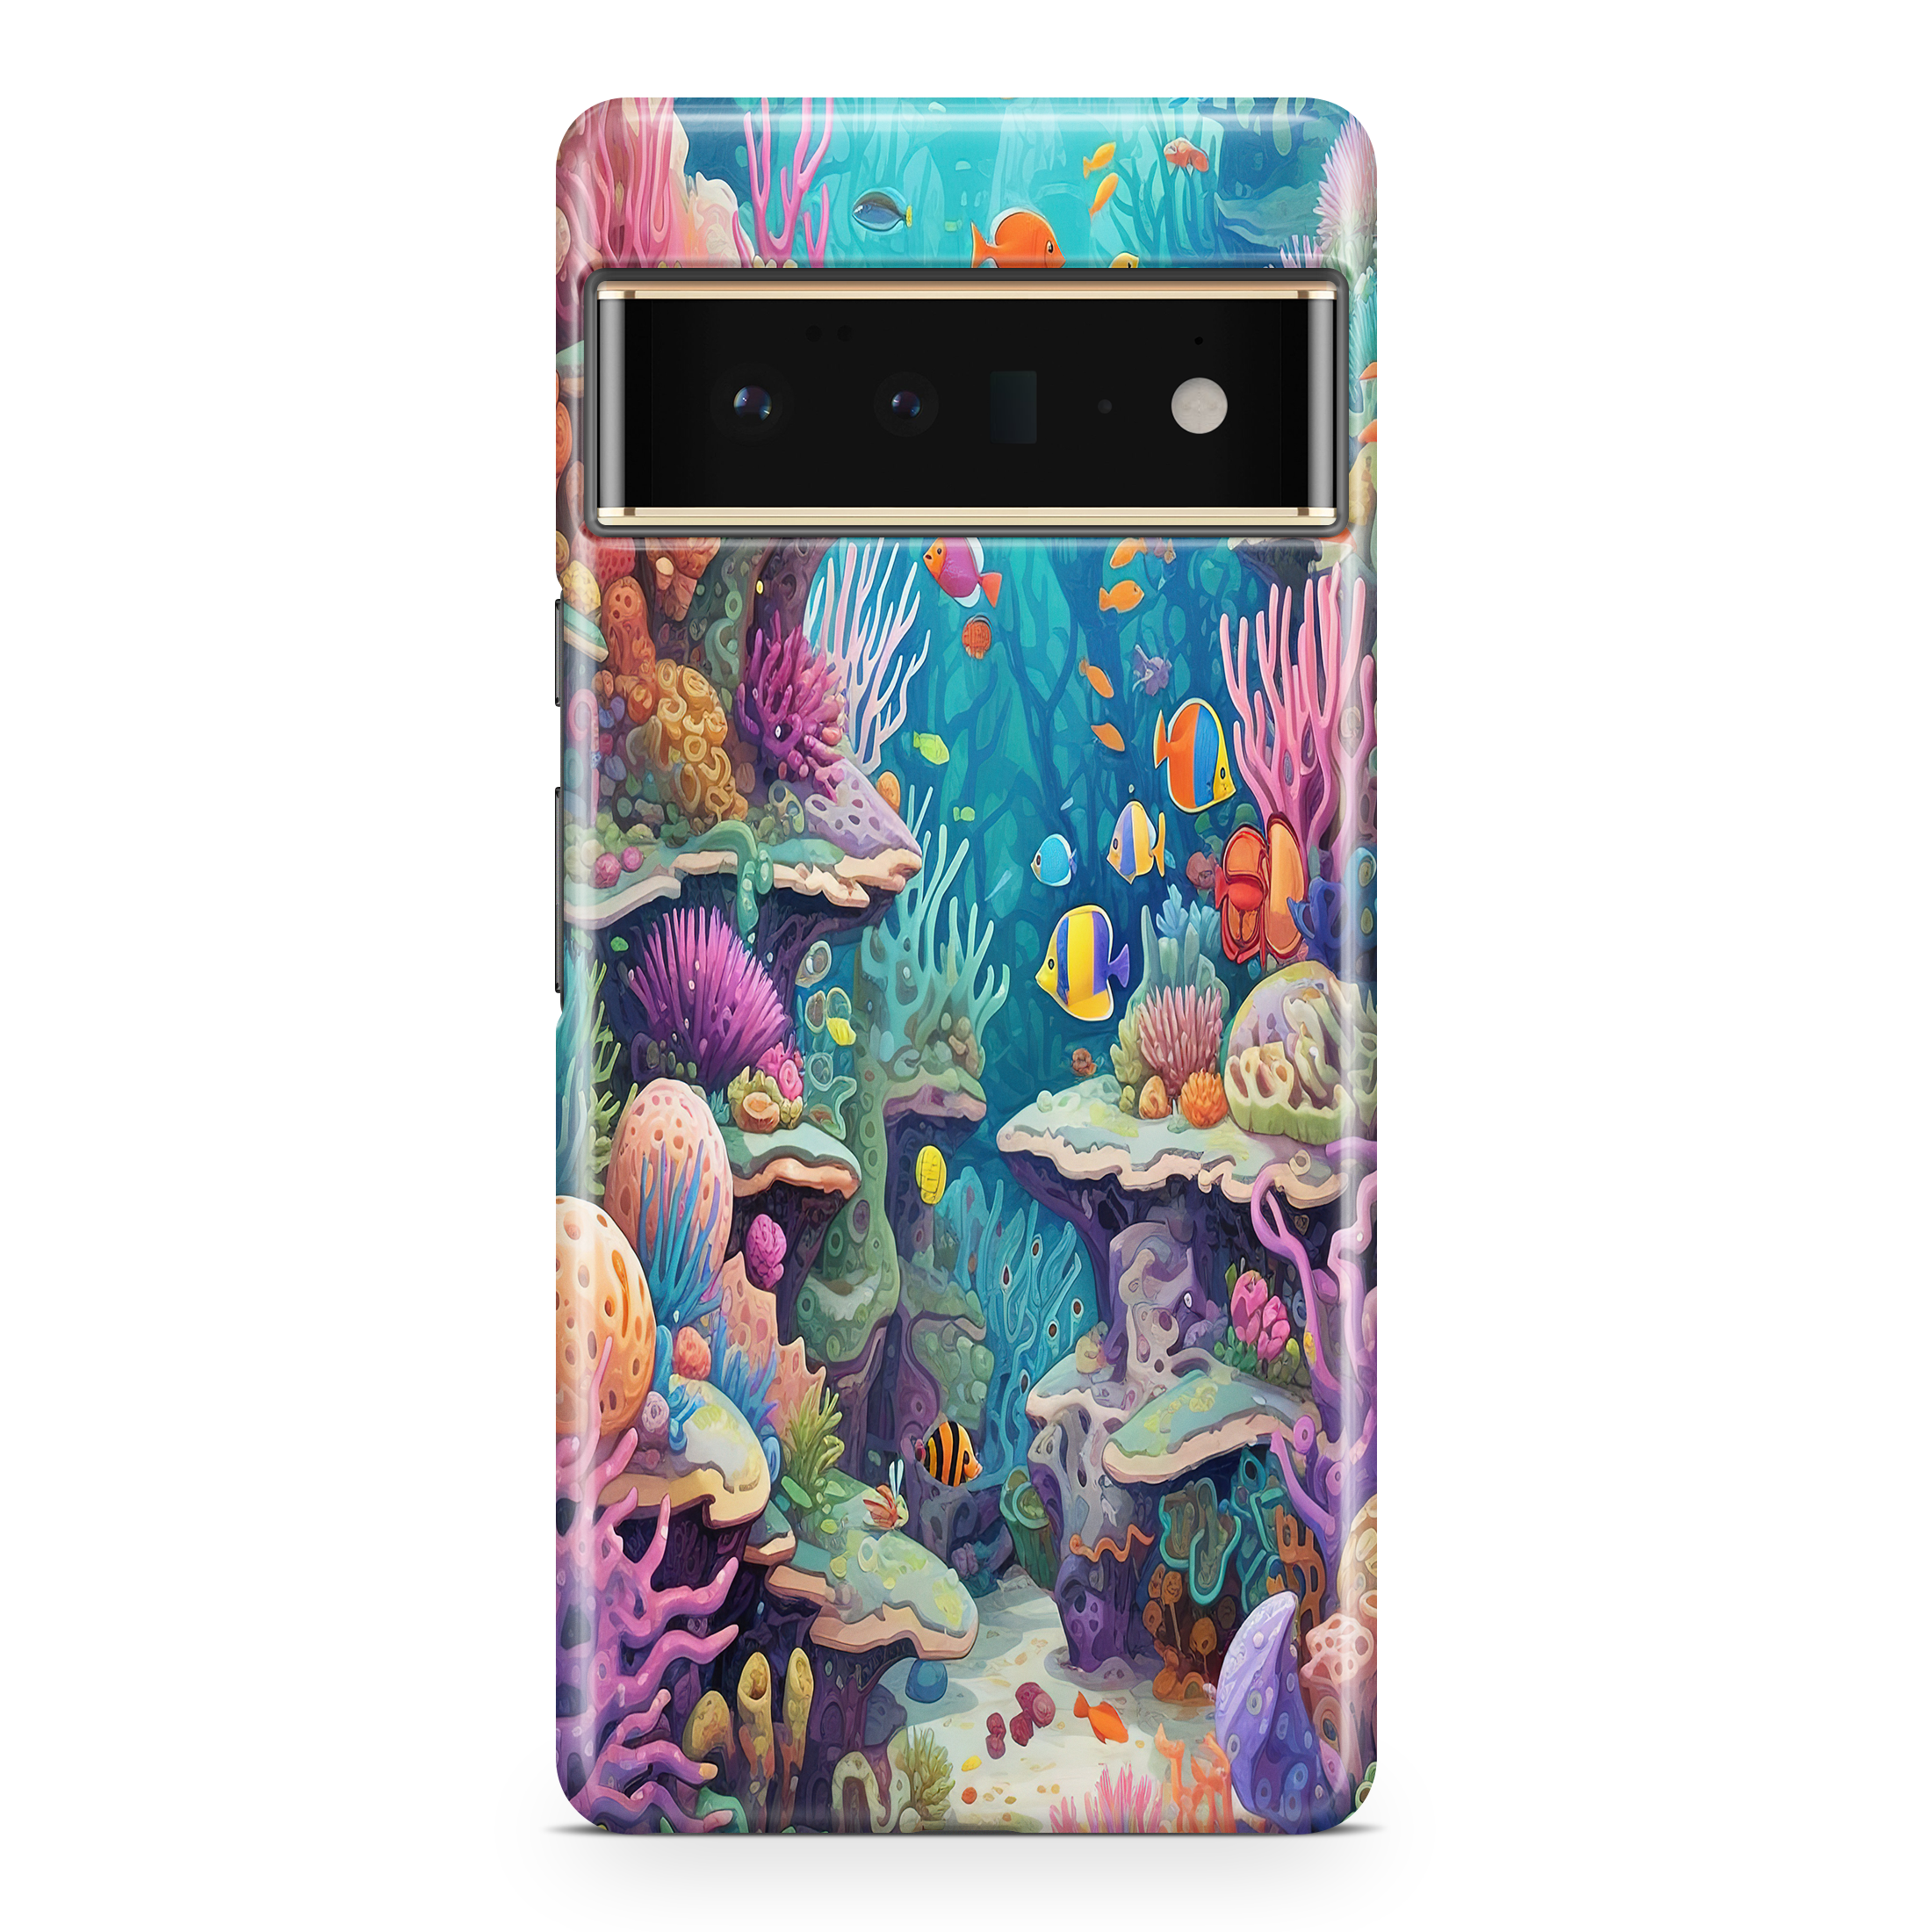 Daydream Coral - Google phone case designs by CaseSwagger